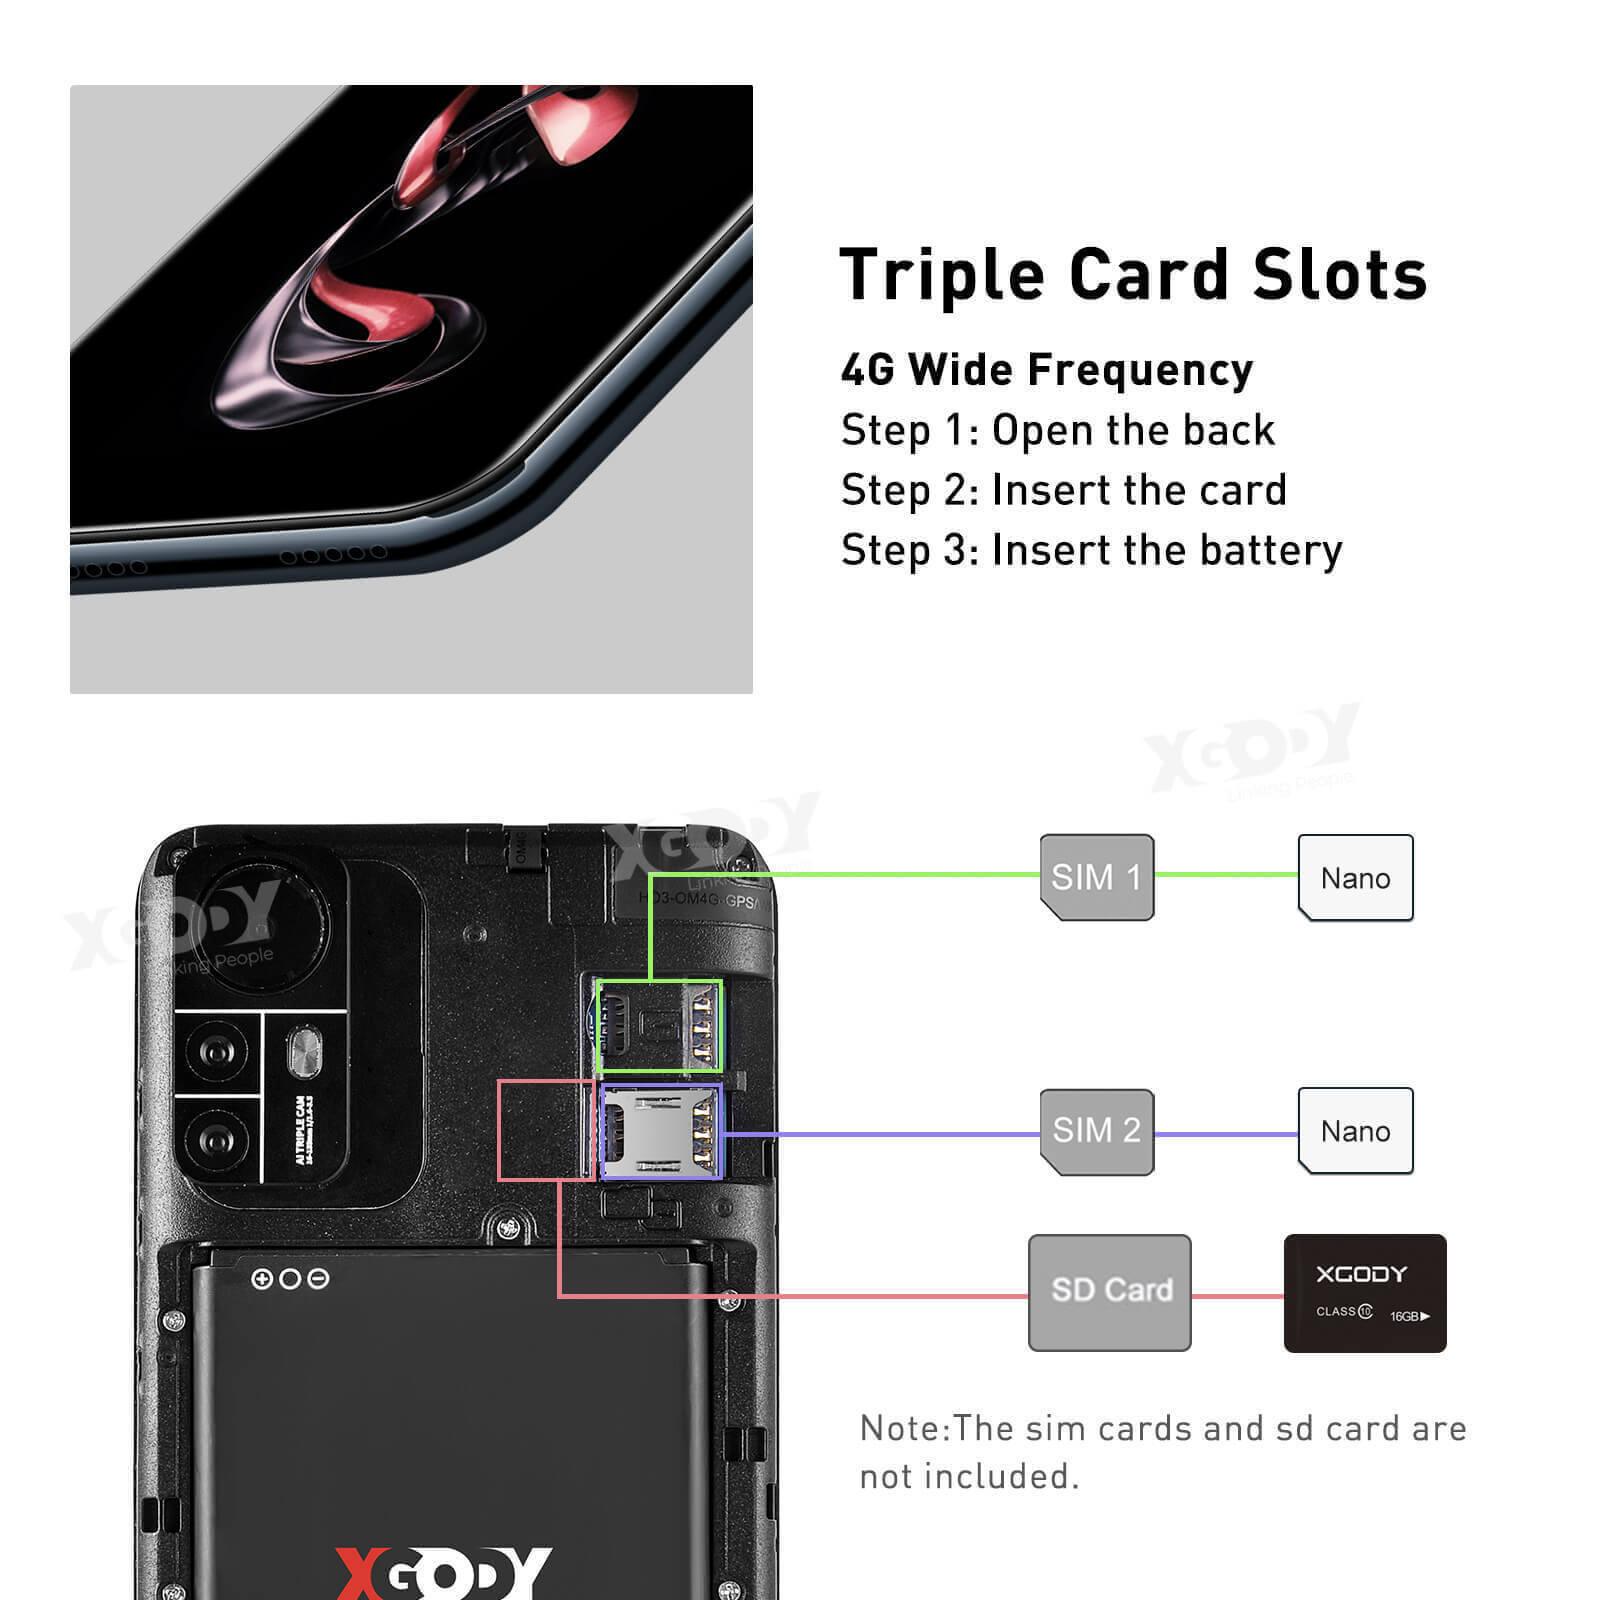 Cost-effective and Most worthwhile XGODY Android Phone X17 - Affordable 4G Smartphone with Dual SIM and Expandable Memory - XGODY 